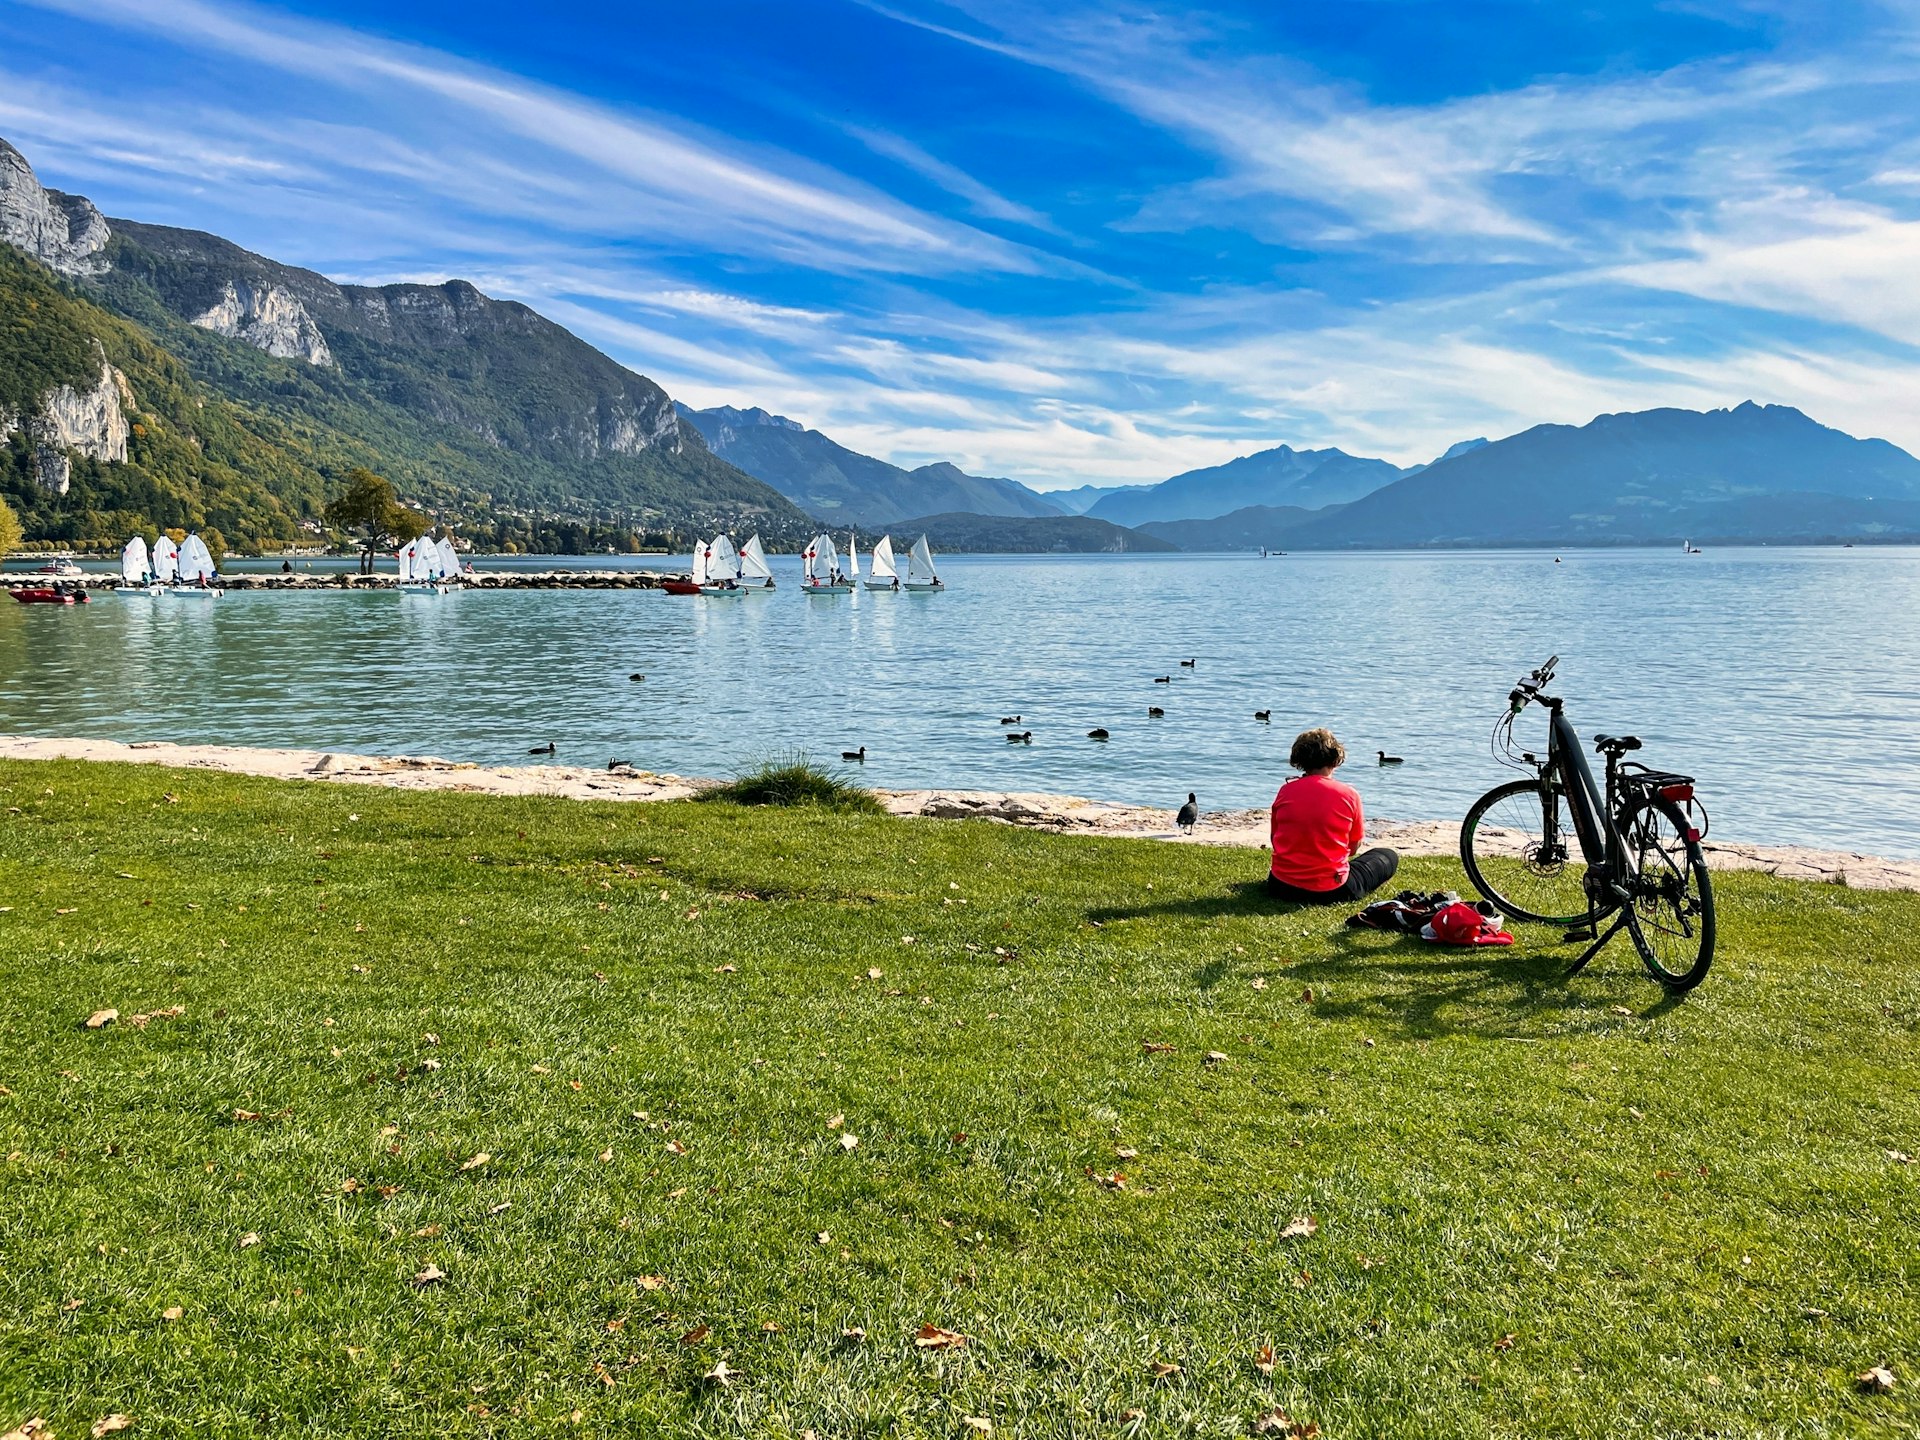 A solo cyclist sits by their bike on the lakeside enjoying the view of the sparkling waters and small sail boats in the distance